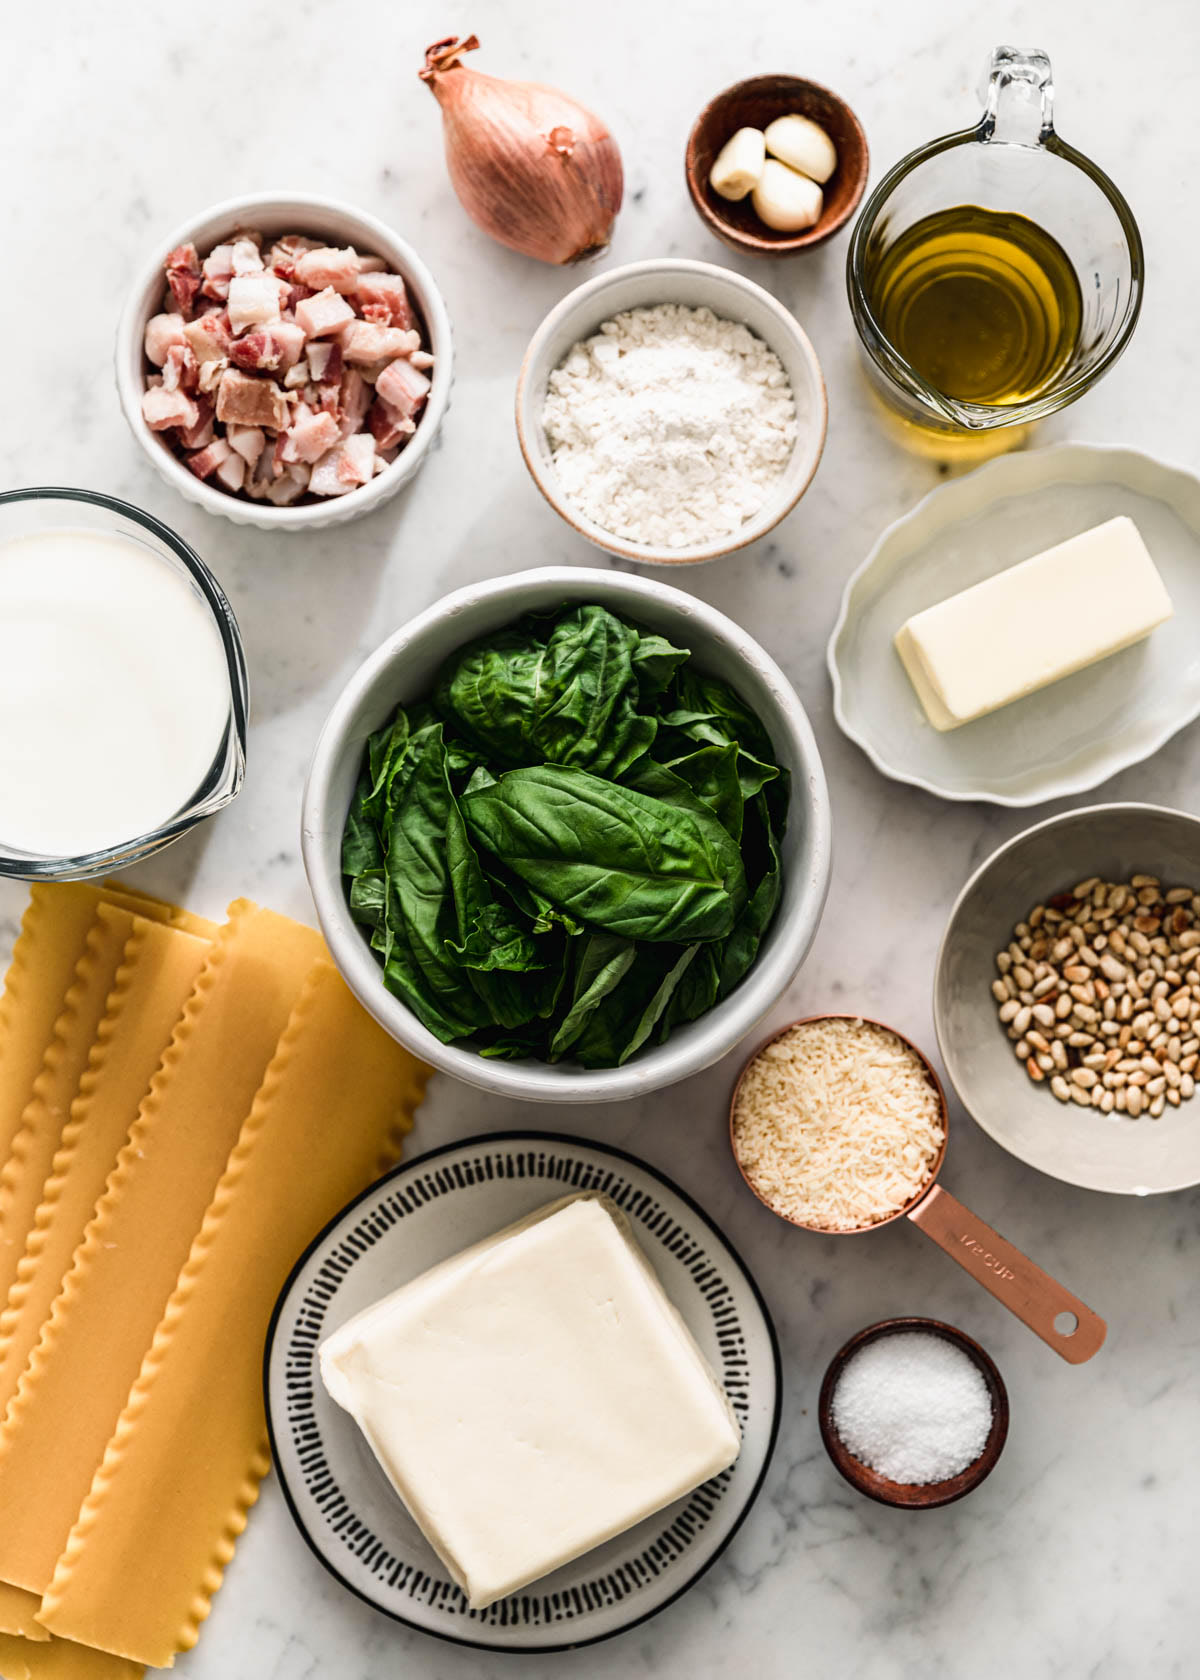 An overhead image of a cream-colored bowl of basil, a bowl of flour, a grey bowl of pine nuts, a measuring cup of Parmesan, measuring cups with milk and olive oil, a shallot, noodles, and a bowl of pancetta on a marble counter.